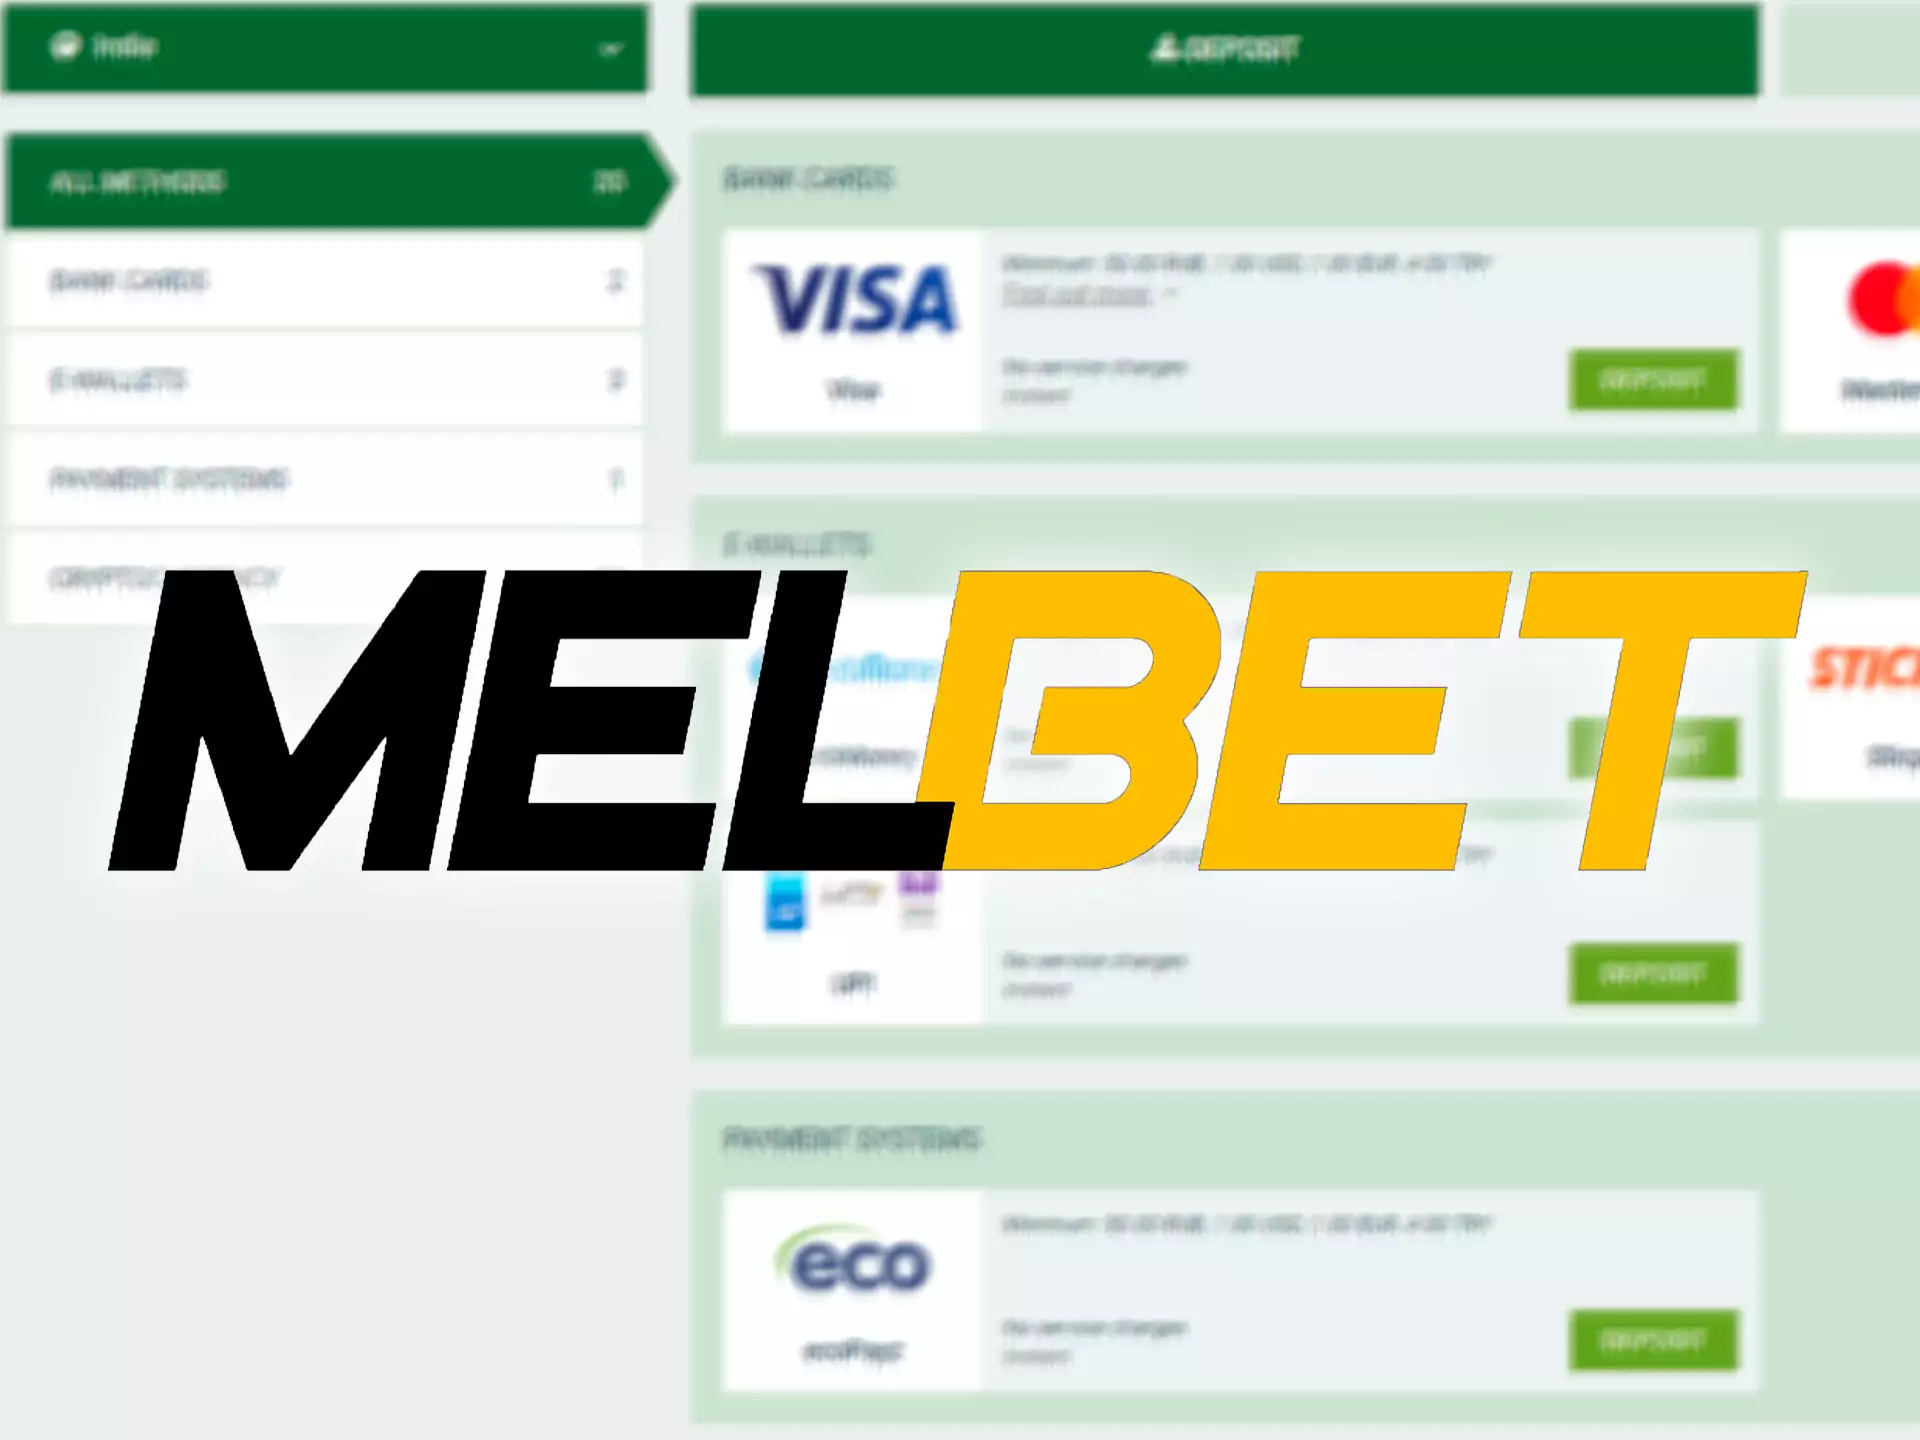 Register at Melbet and start IPL cricket betting in India.